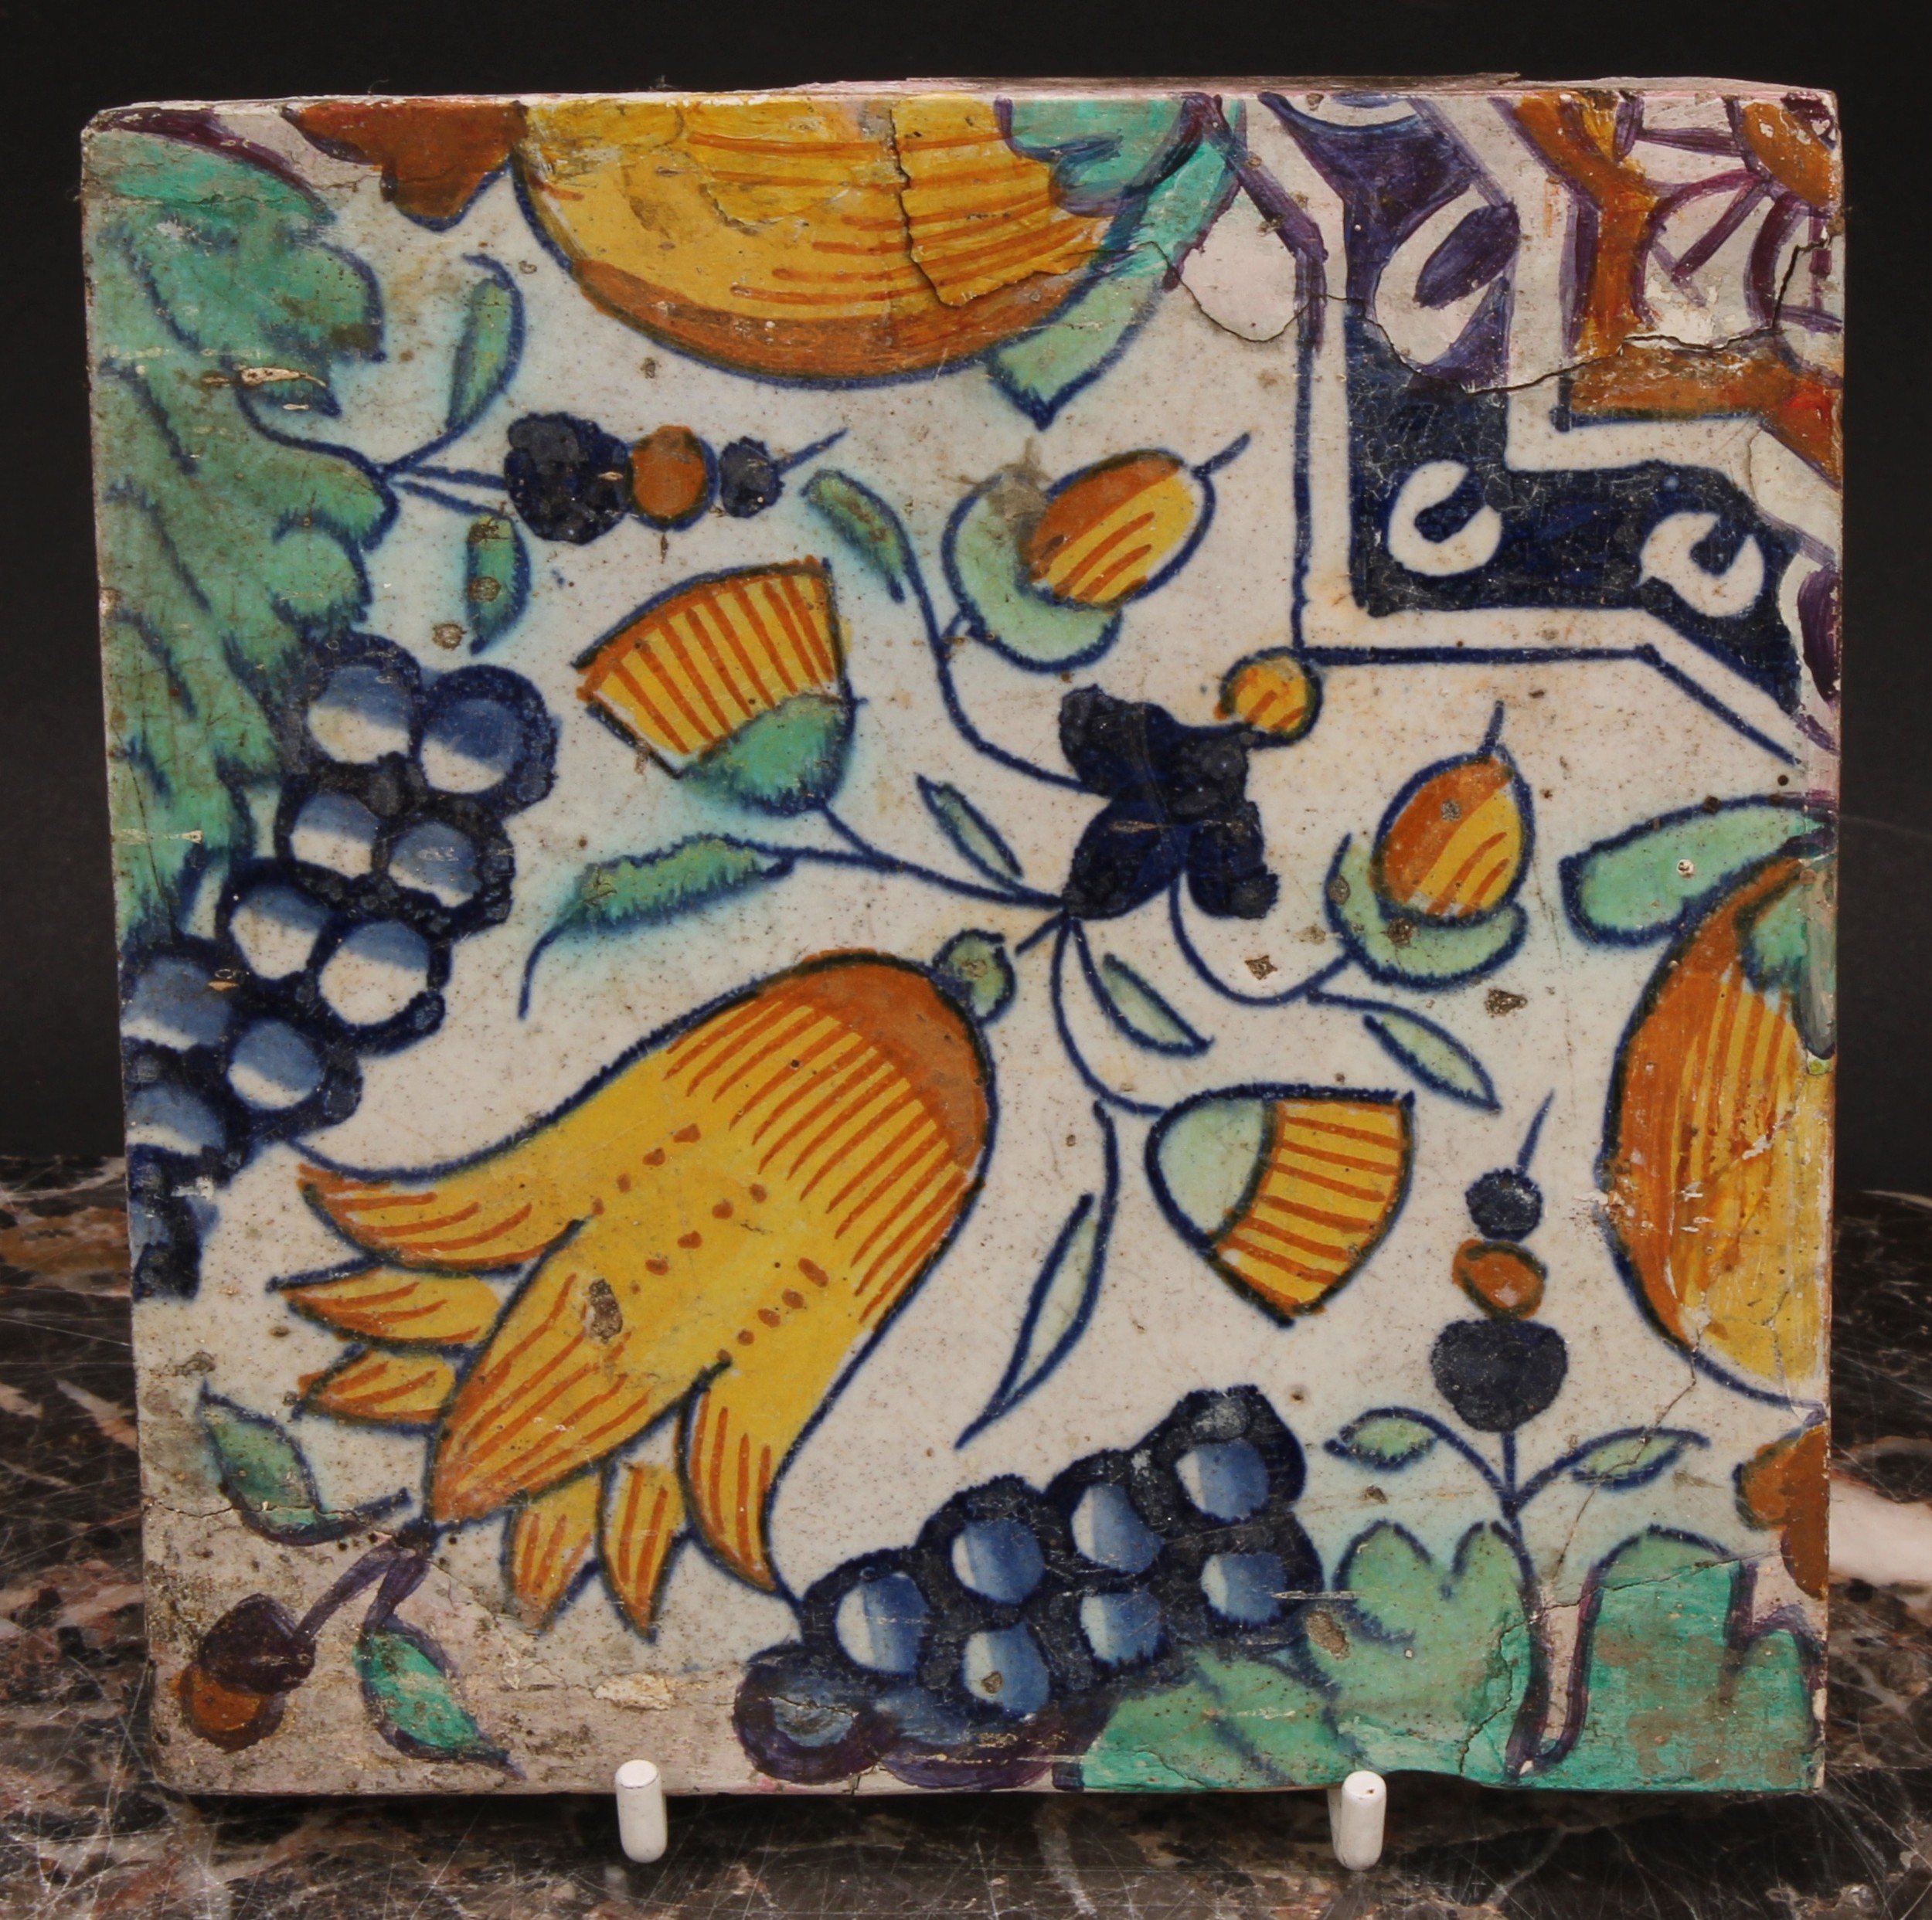 A harlequin suite of four 18th century Delft tiles, polychrome and traditional (4) - Image 3 of 6